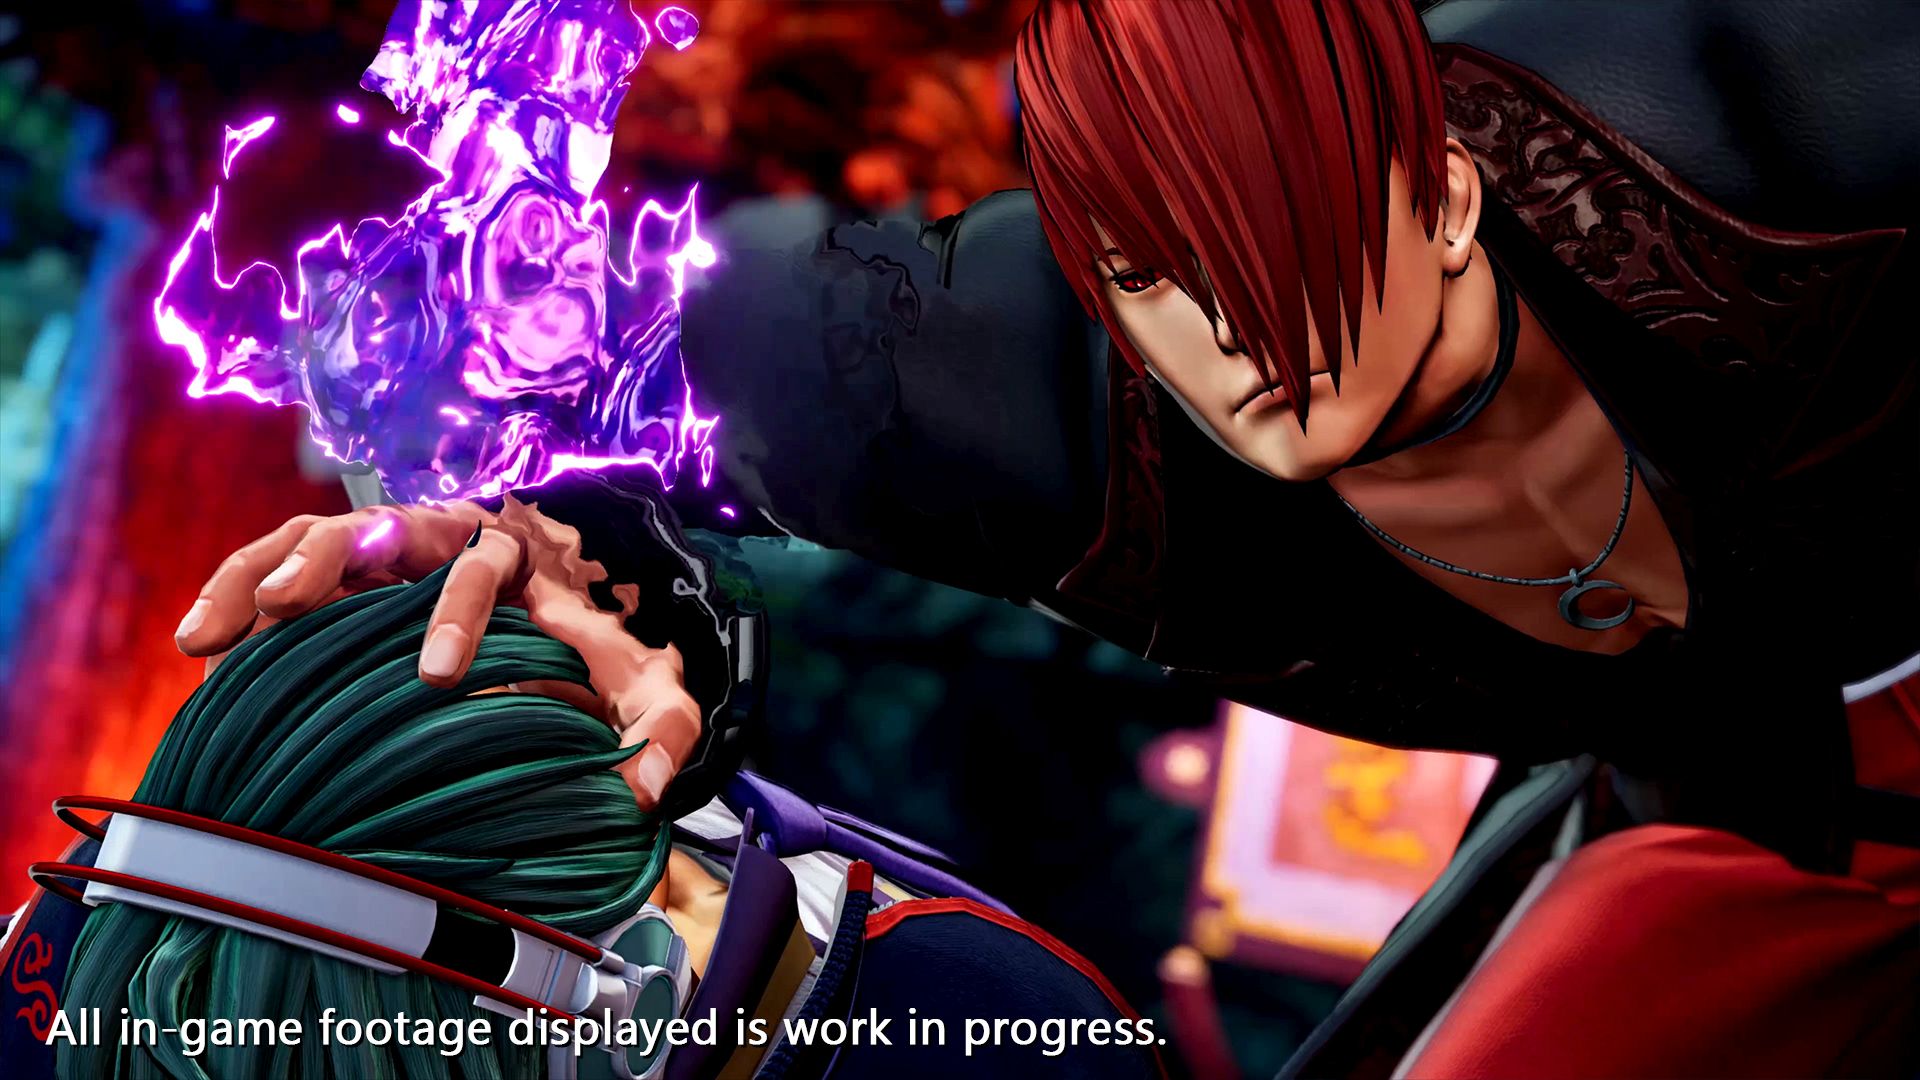 King of Fighters 15 review - sticking to its roots